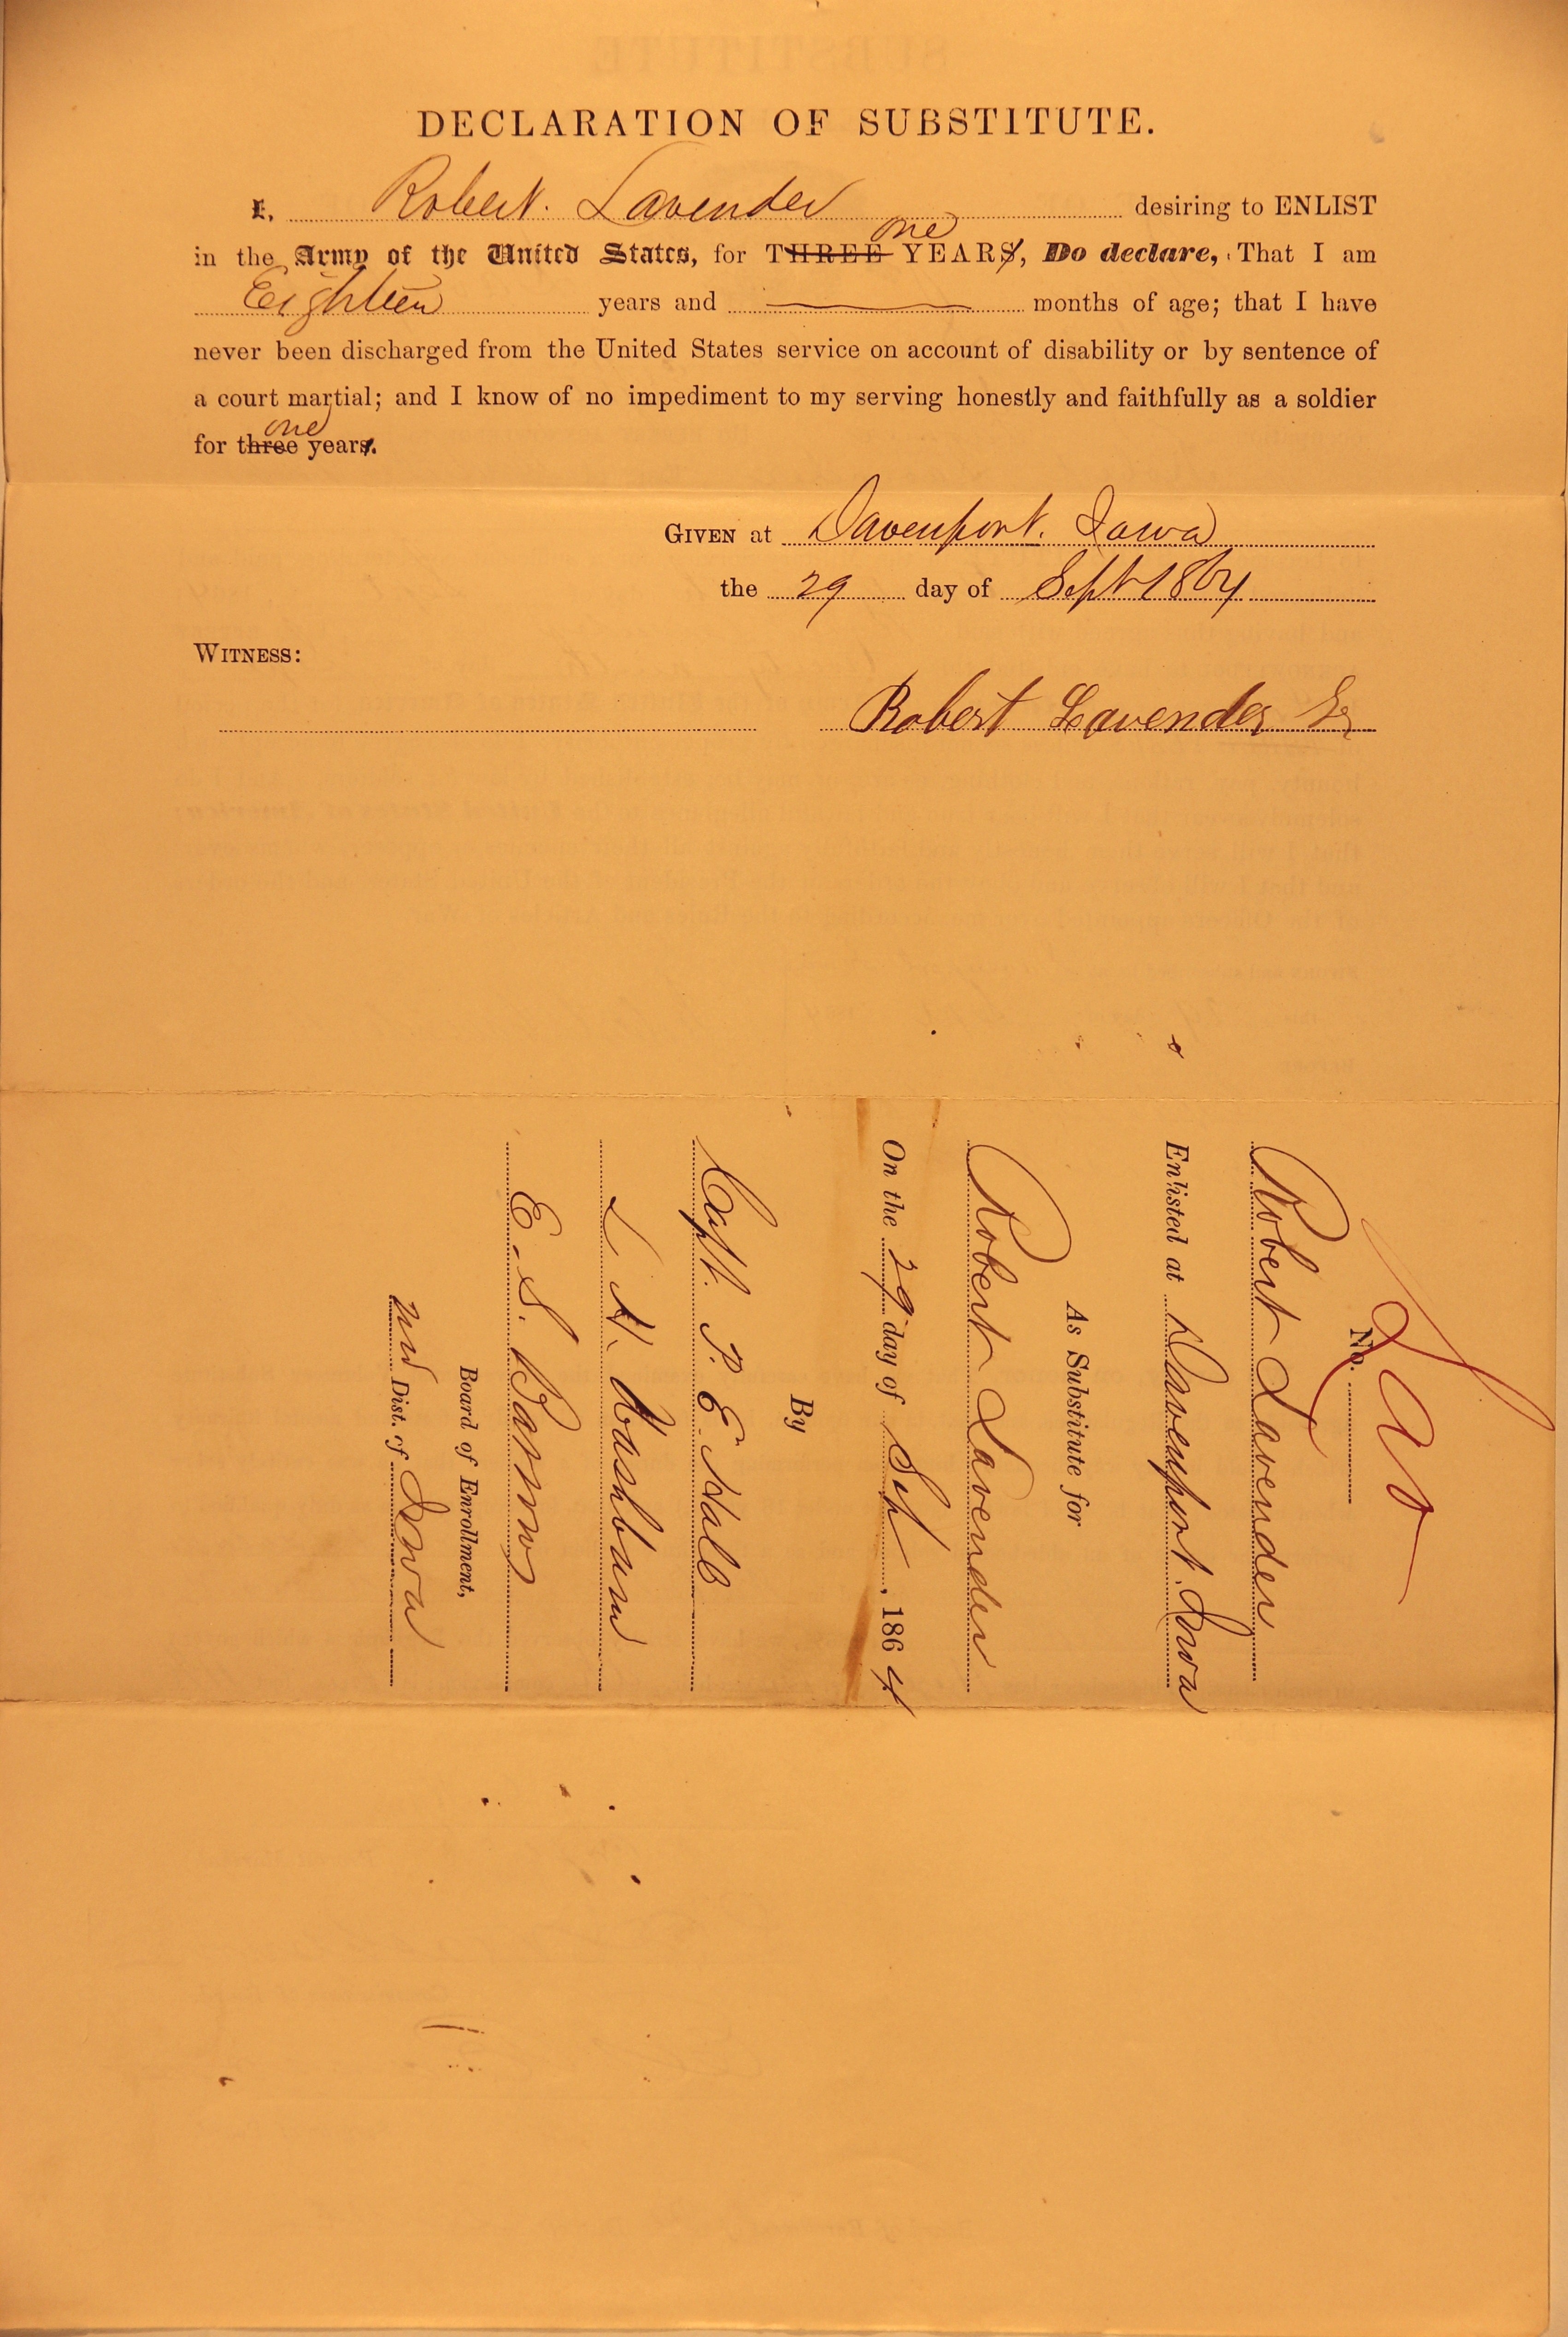 Image of the Declaration of Substitute form accompanying the previous slide